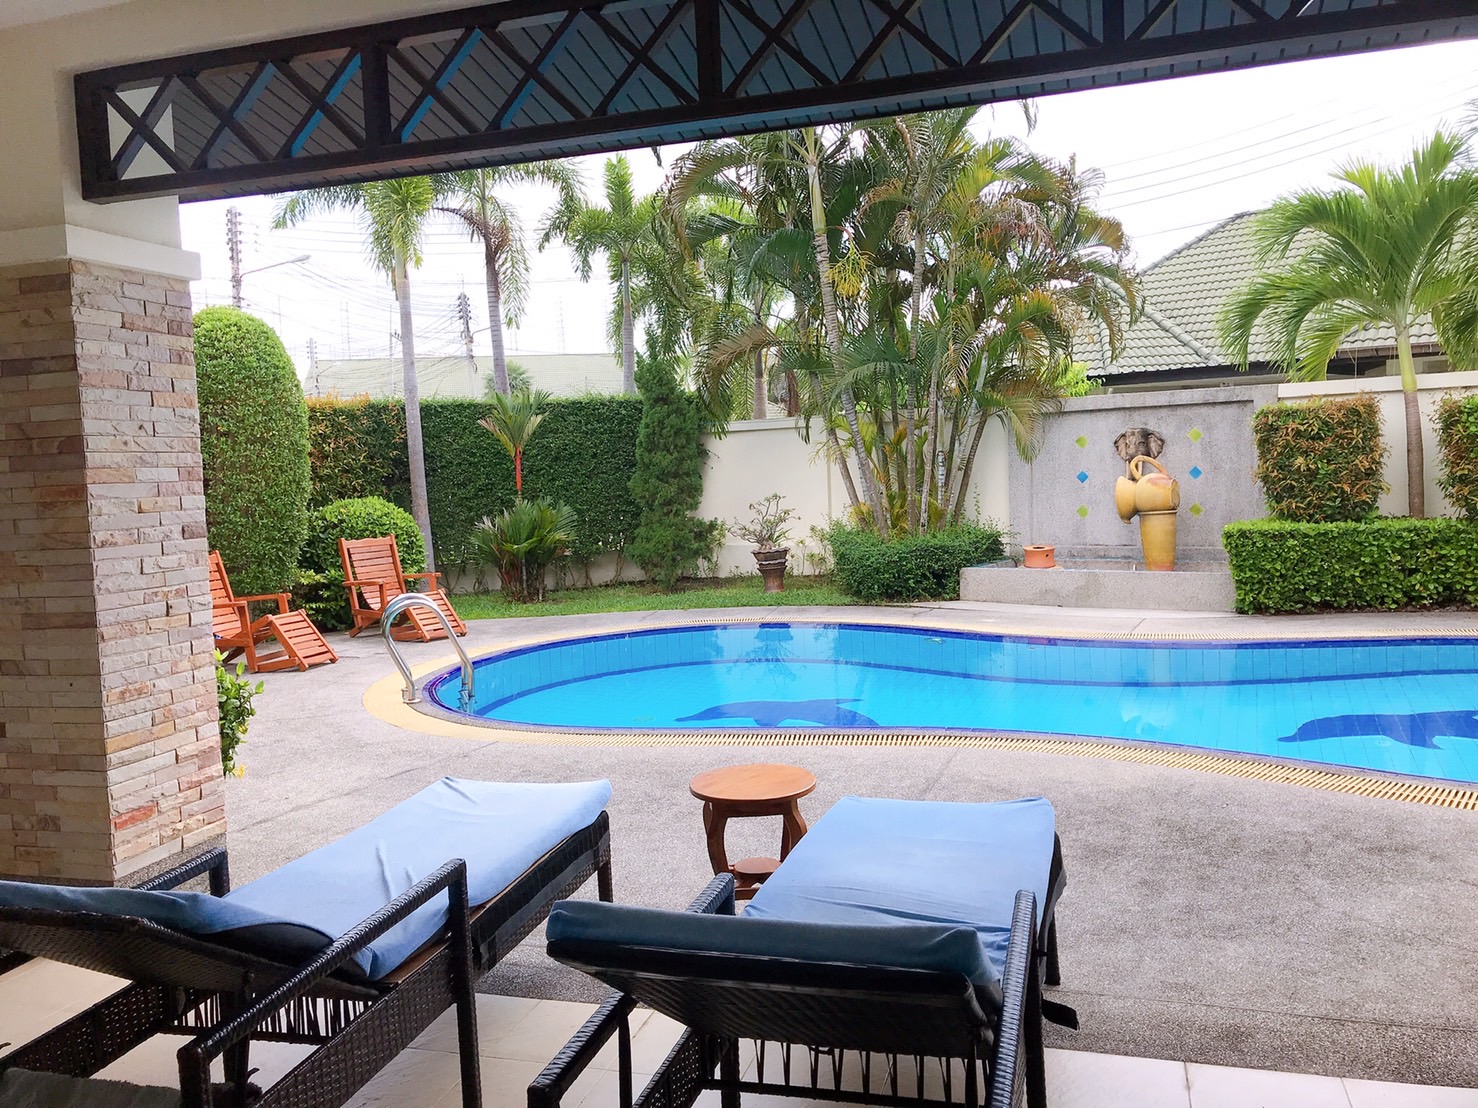 Greenfield village. 3 bedrooms Pool Villa, Soi Siam Country Club. Price reduced from 9.5m baht